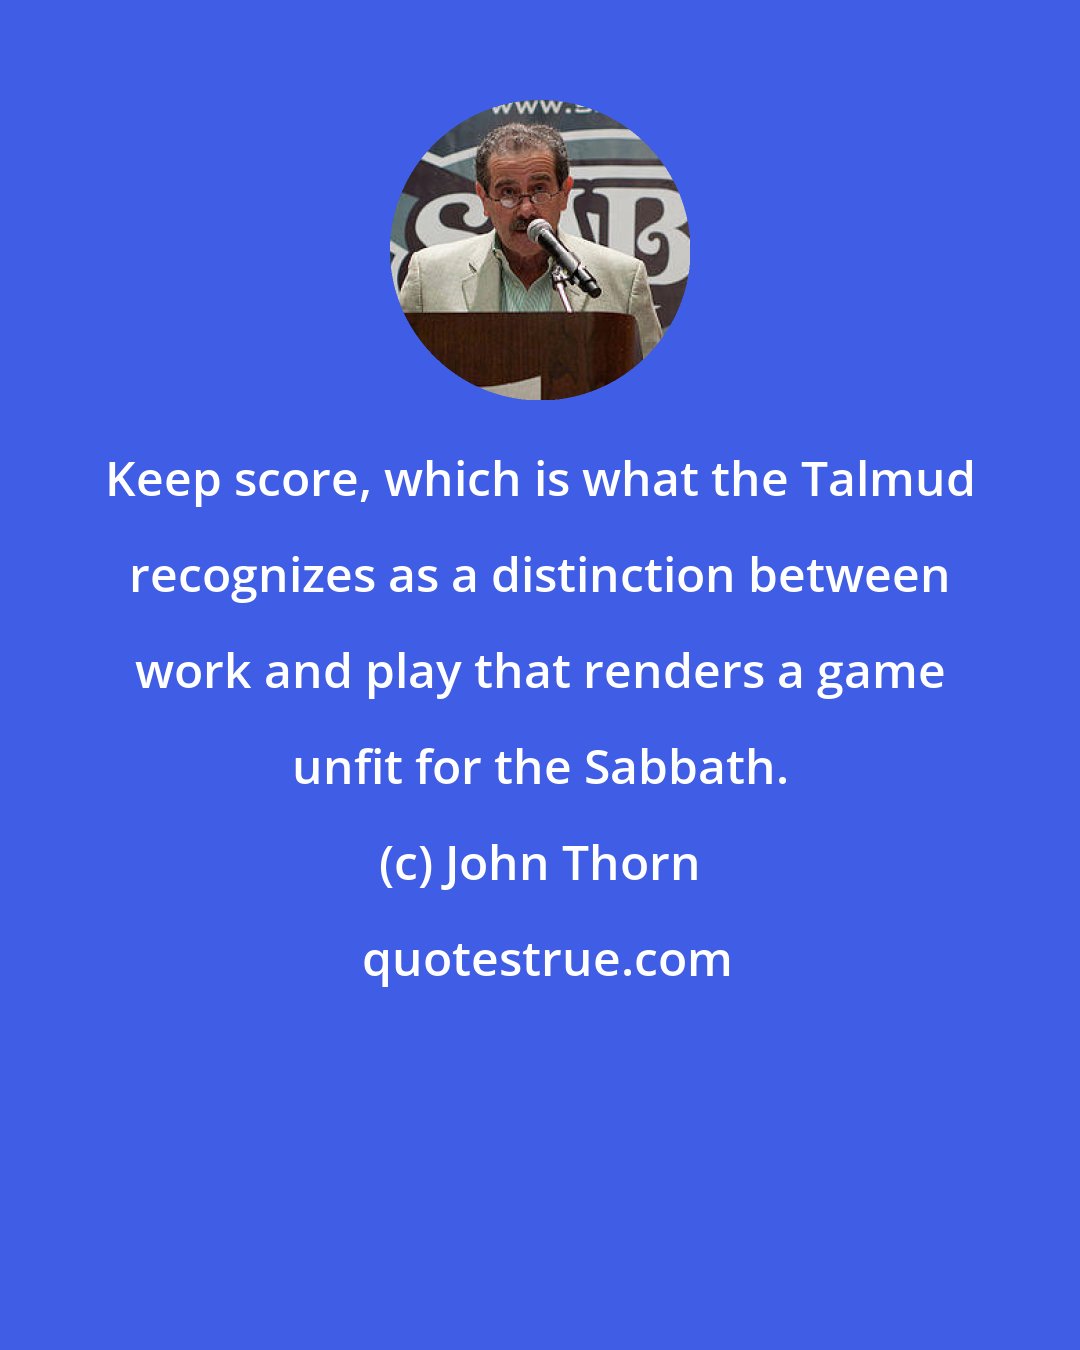 John Thorn: Keep score, which is what the Talmud recognizes as a distinction between work and play that renders a game unfit for the Sabbath.